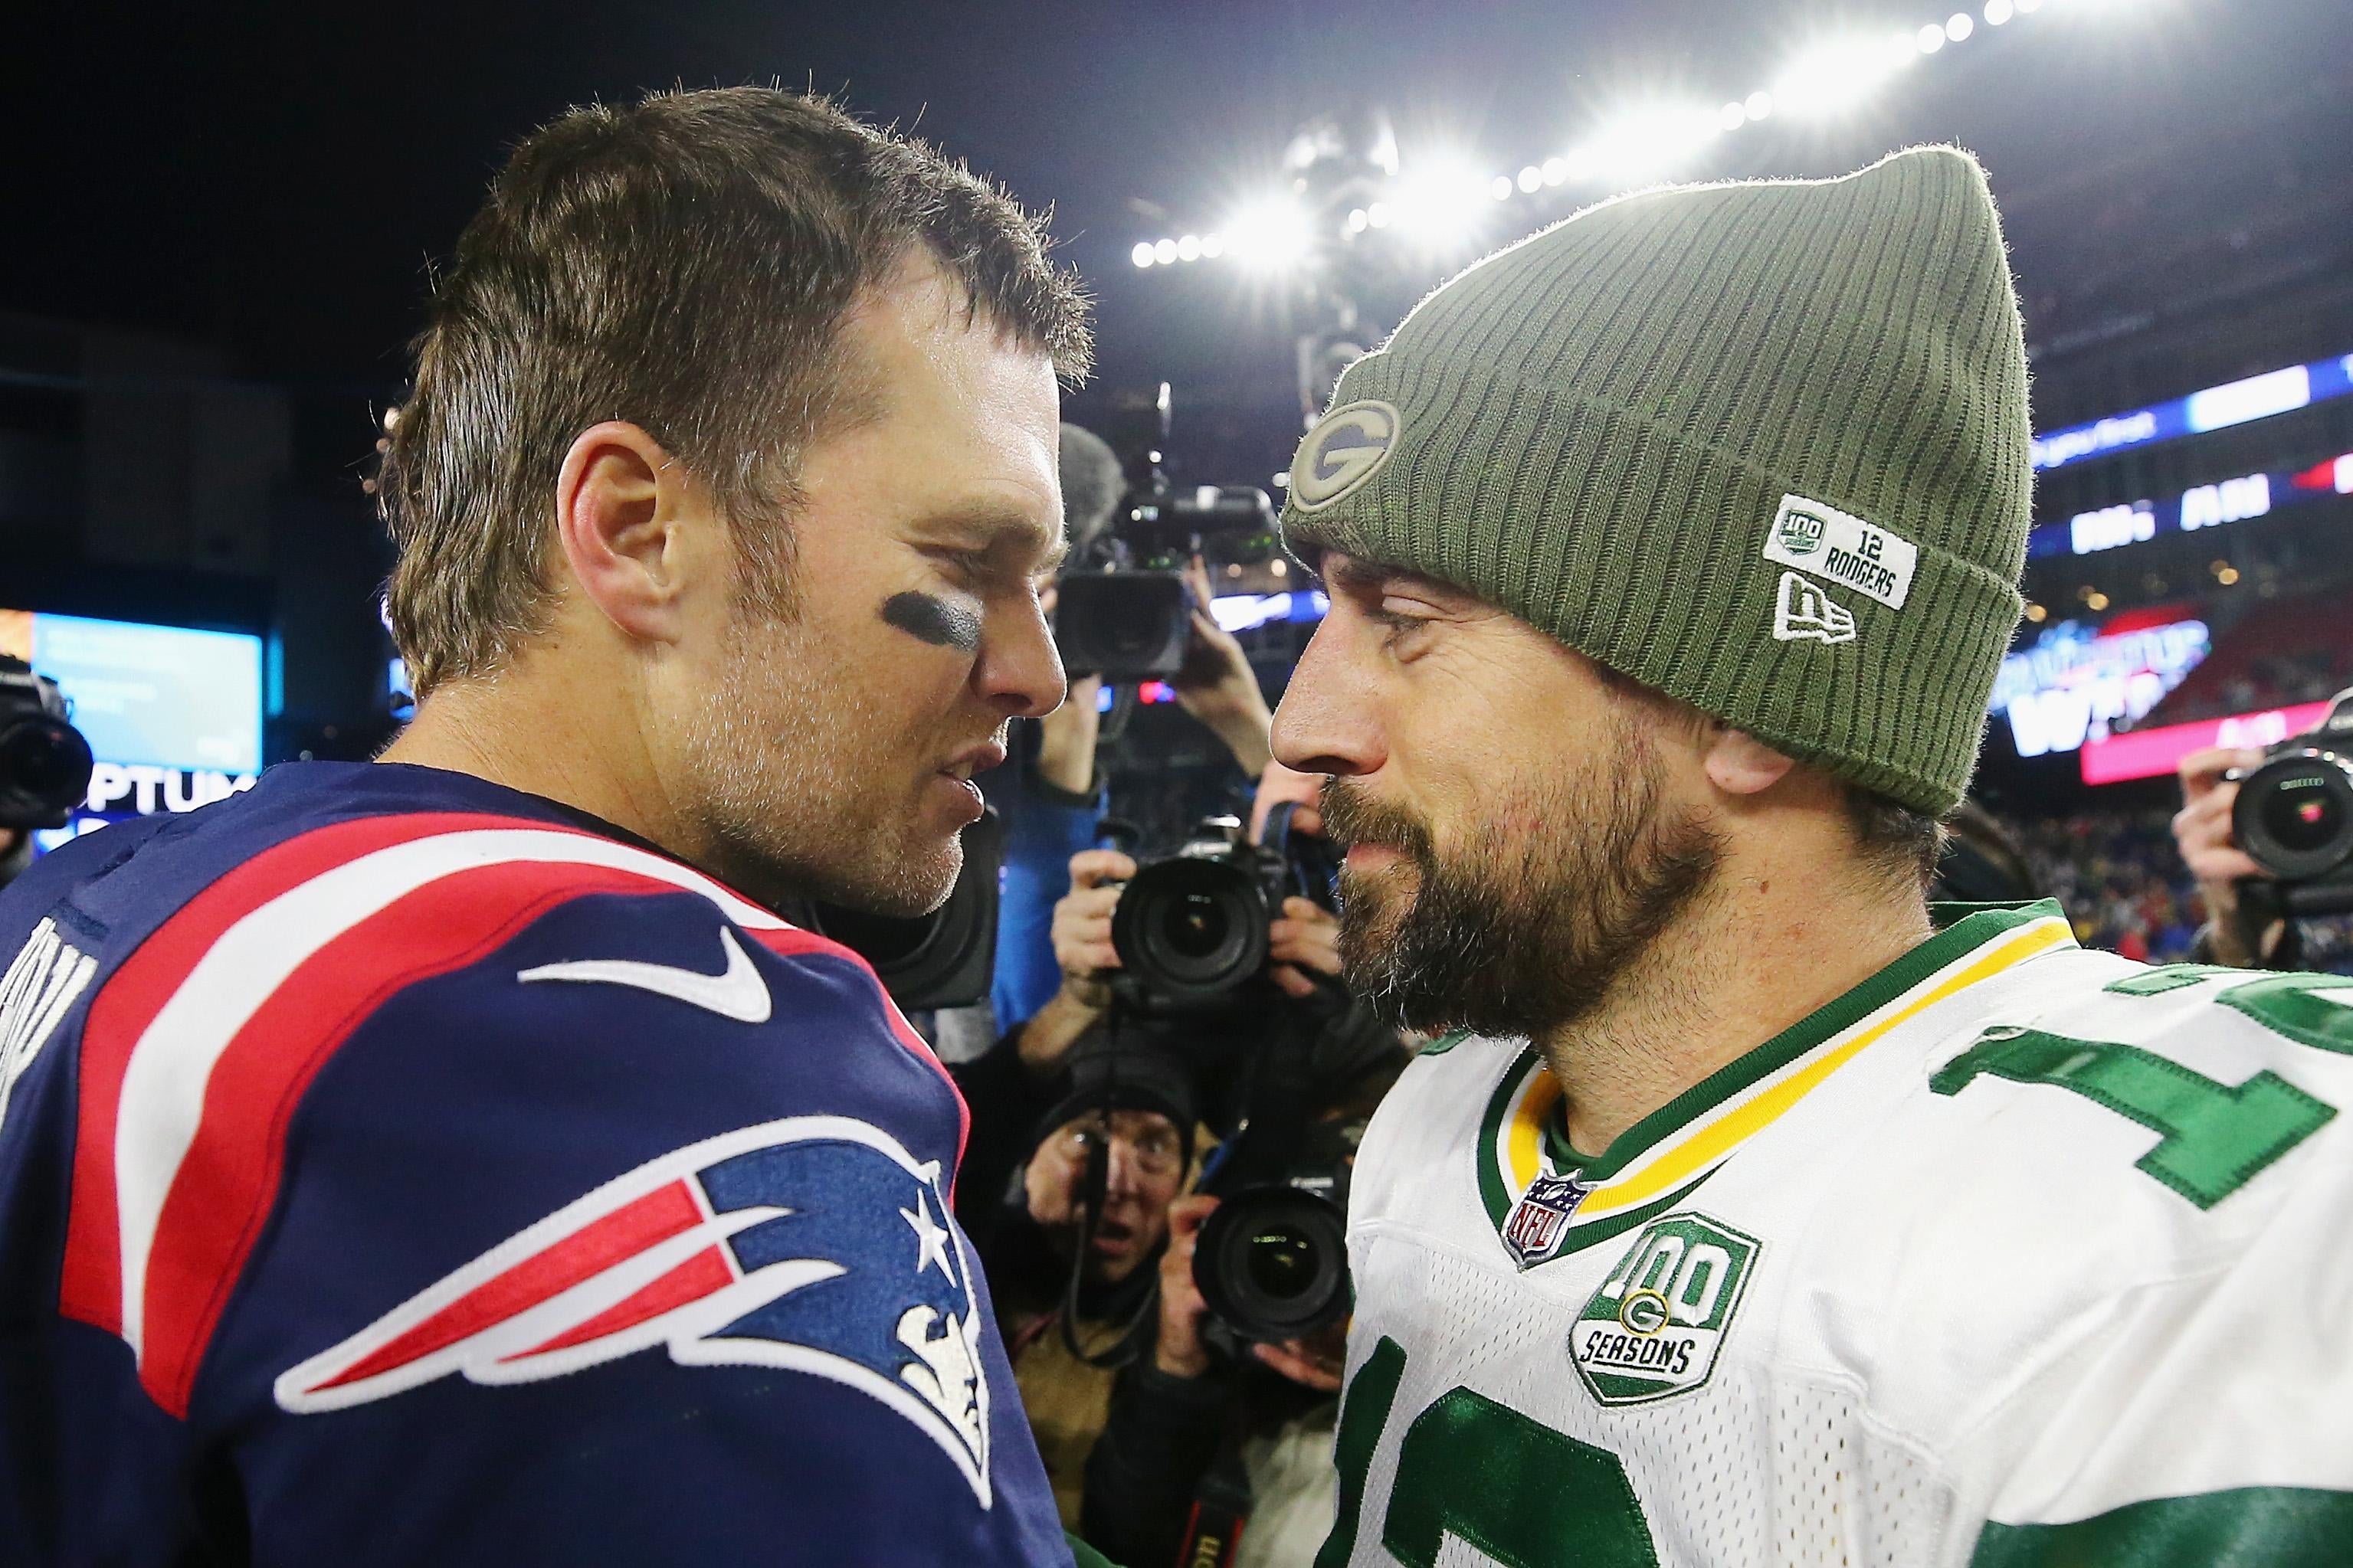 Tom Brady stands face to face with Aaron Rodgers for a postgame chat on the field